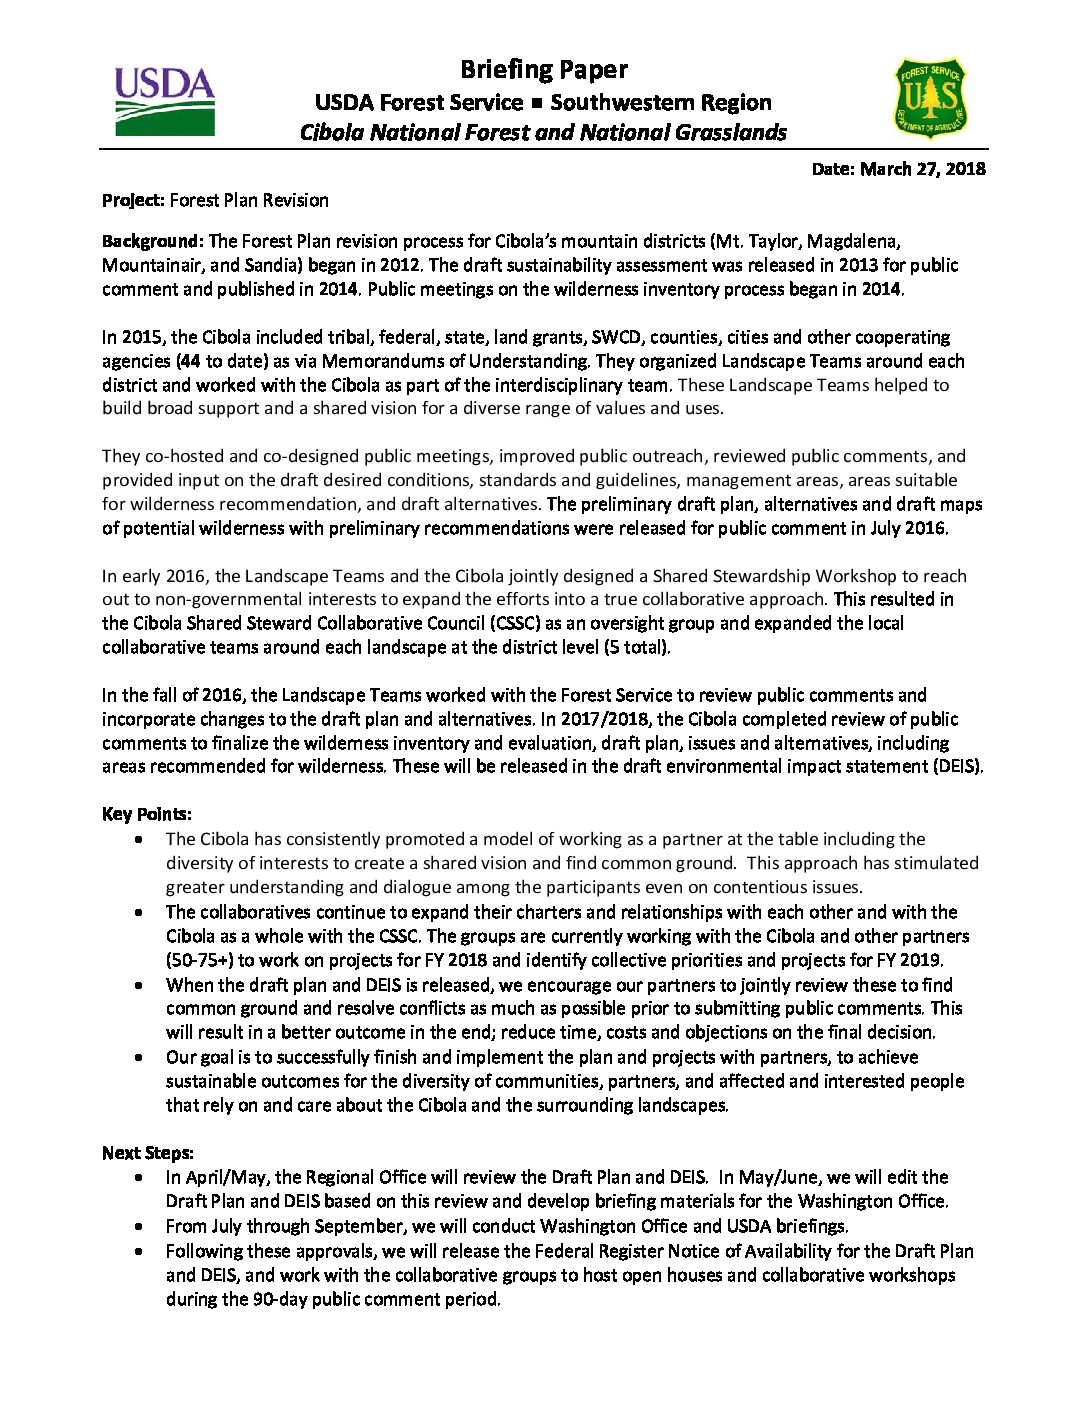 Forest Plan Revision Briefing Paper